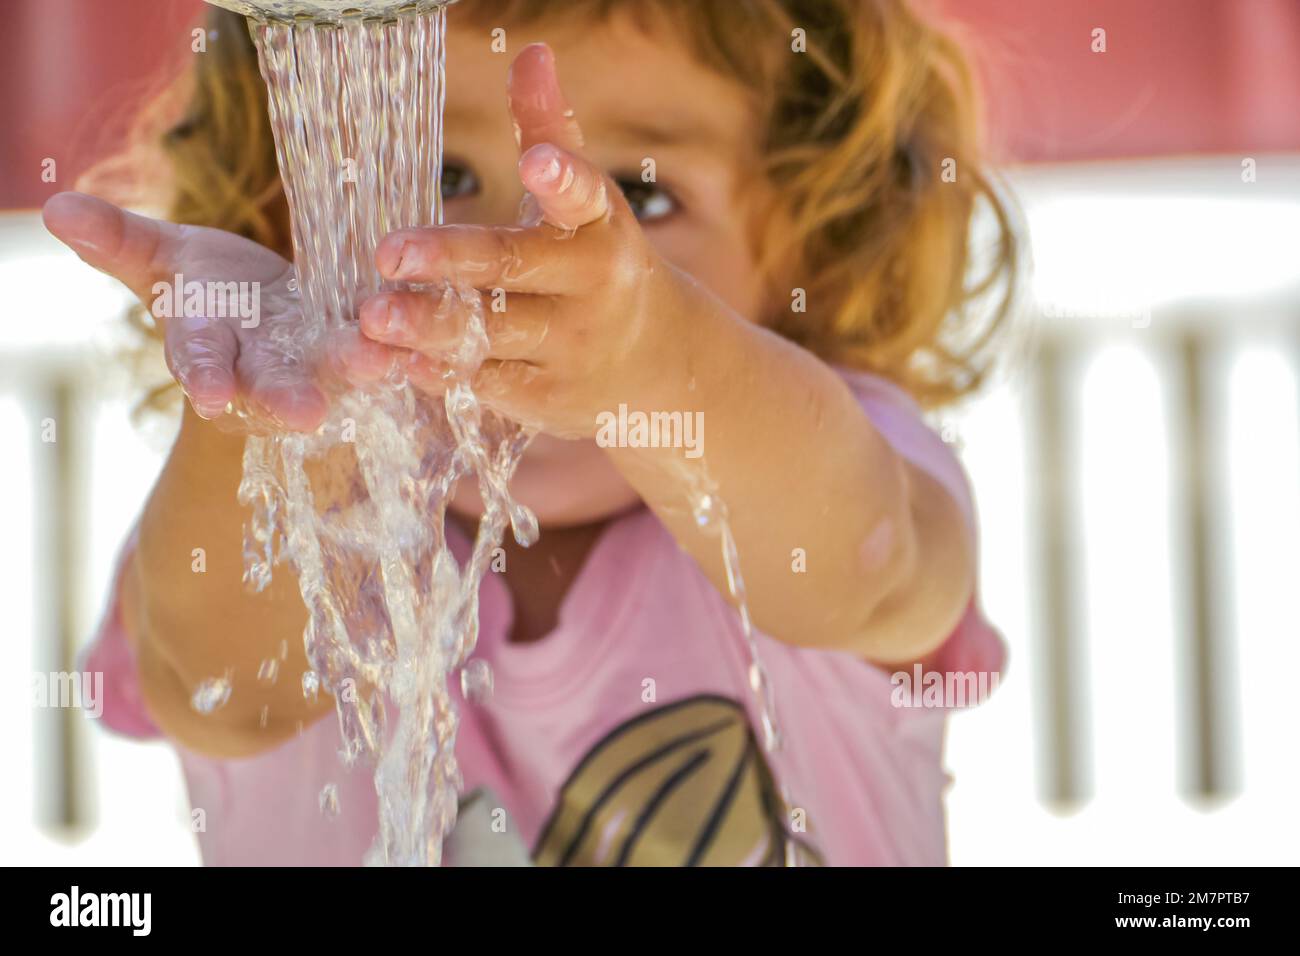 Young girl stands in front of water streaming from faucet washing her hands. Stock Photo